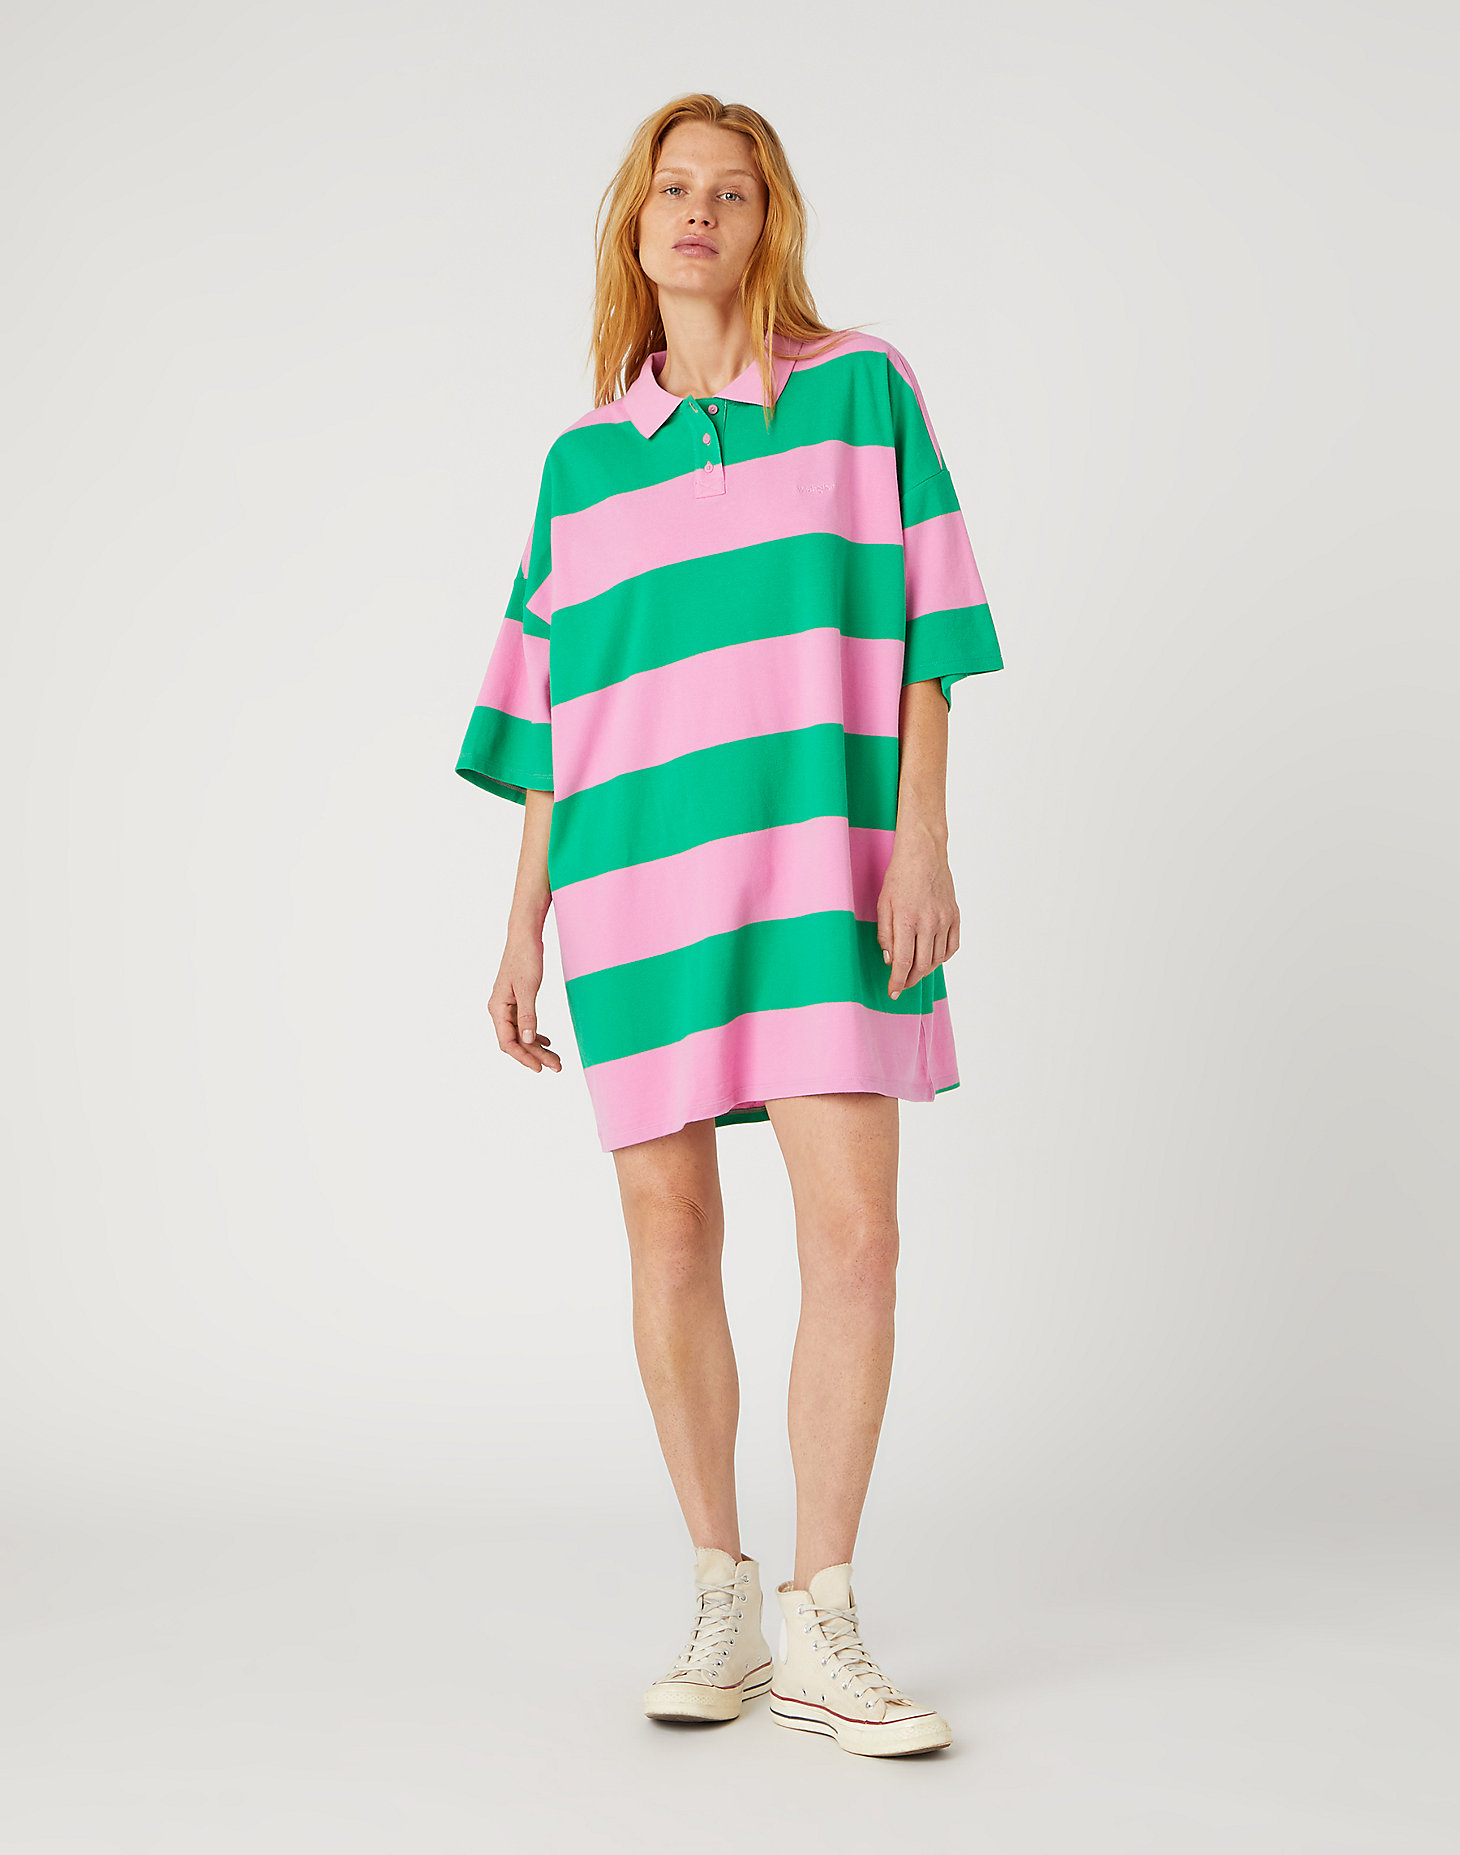 Polo Tee Dress in Bright Green alternative view 1